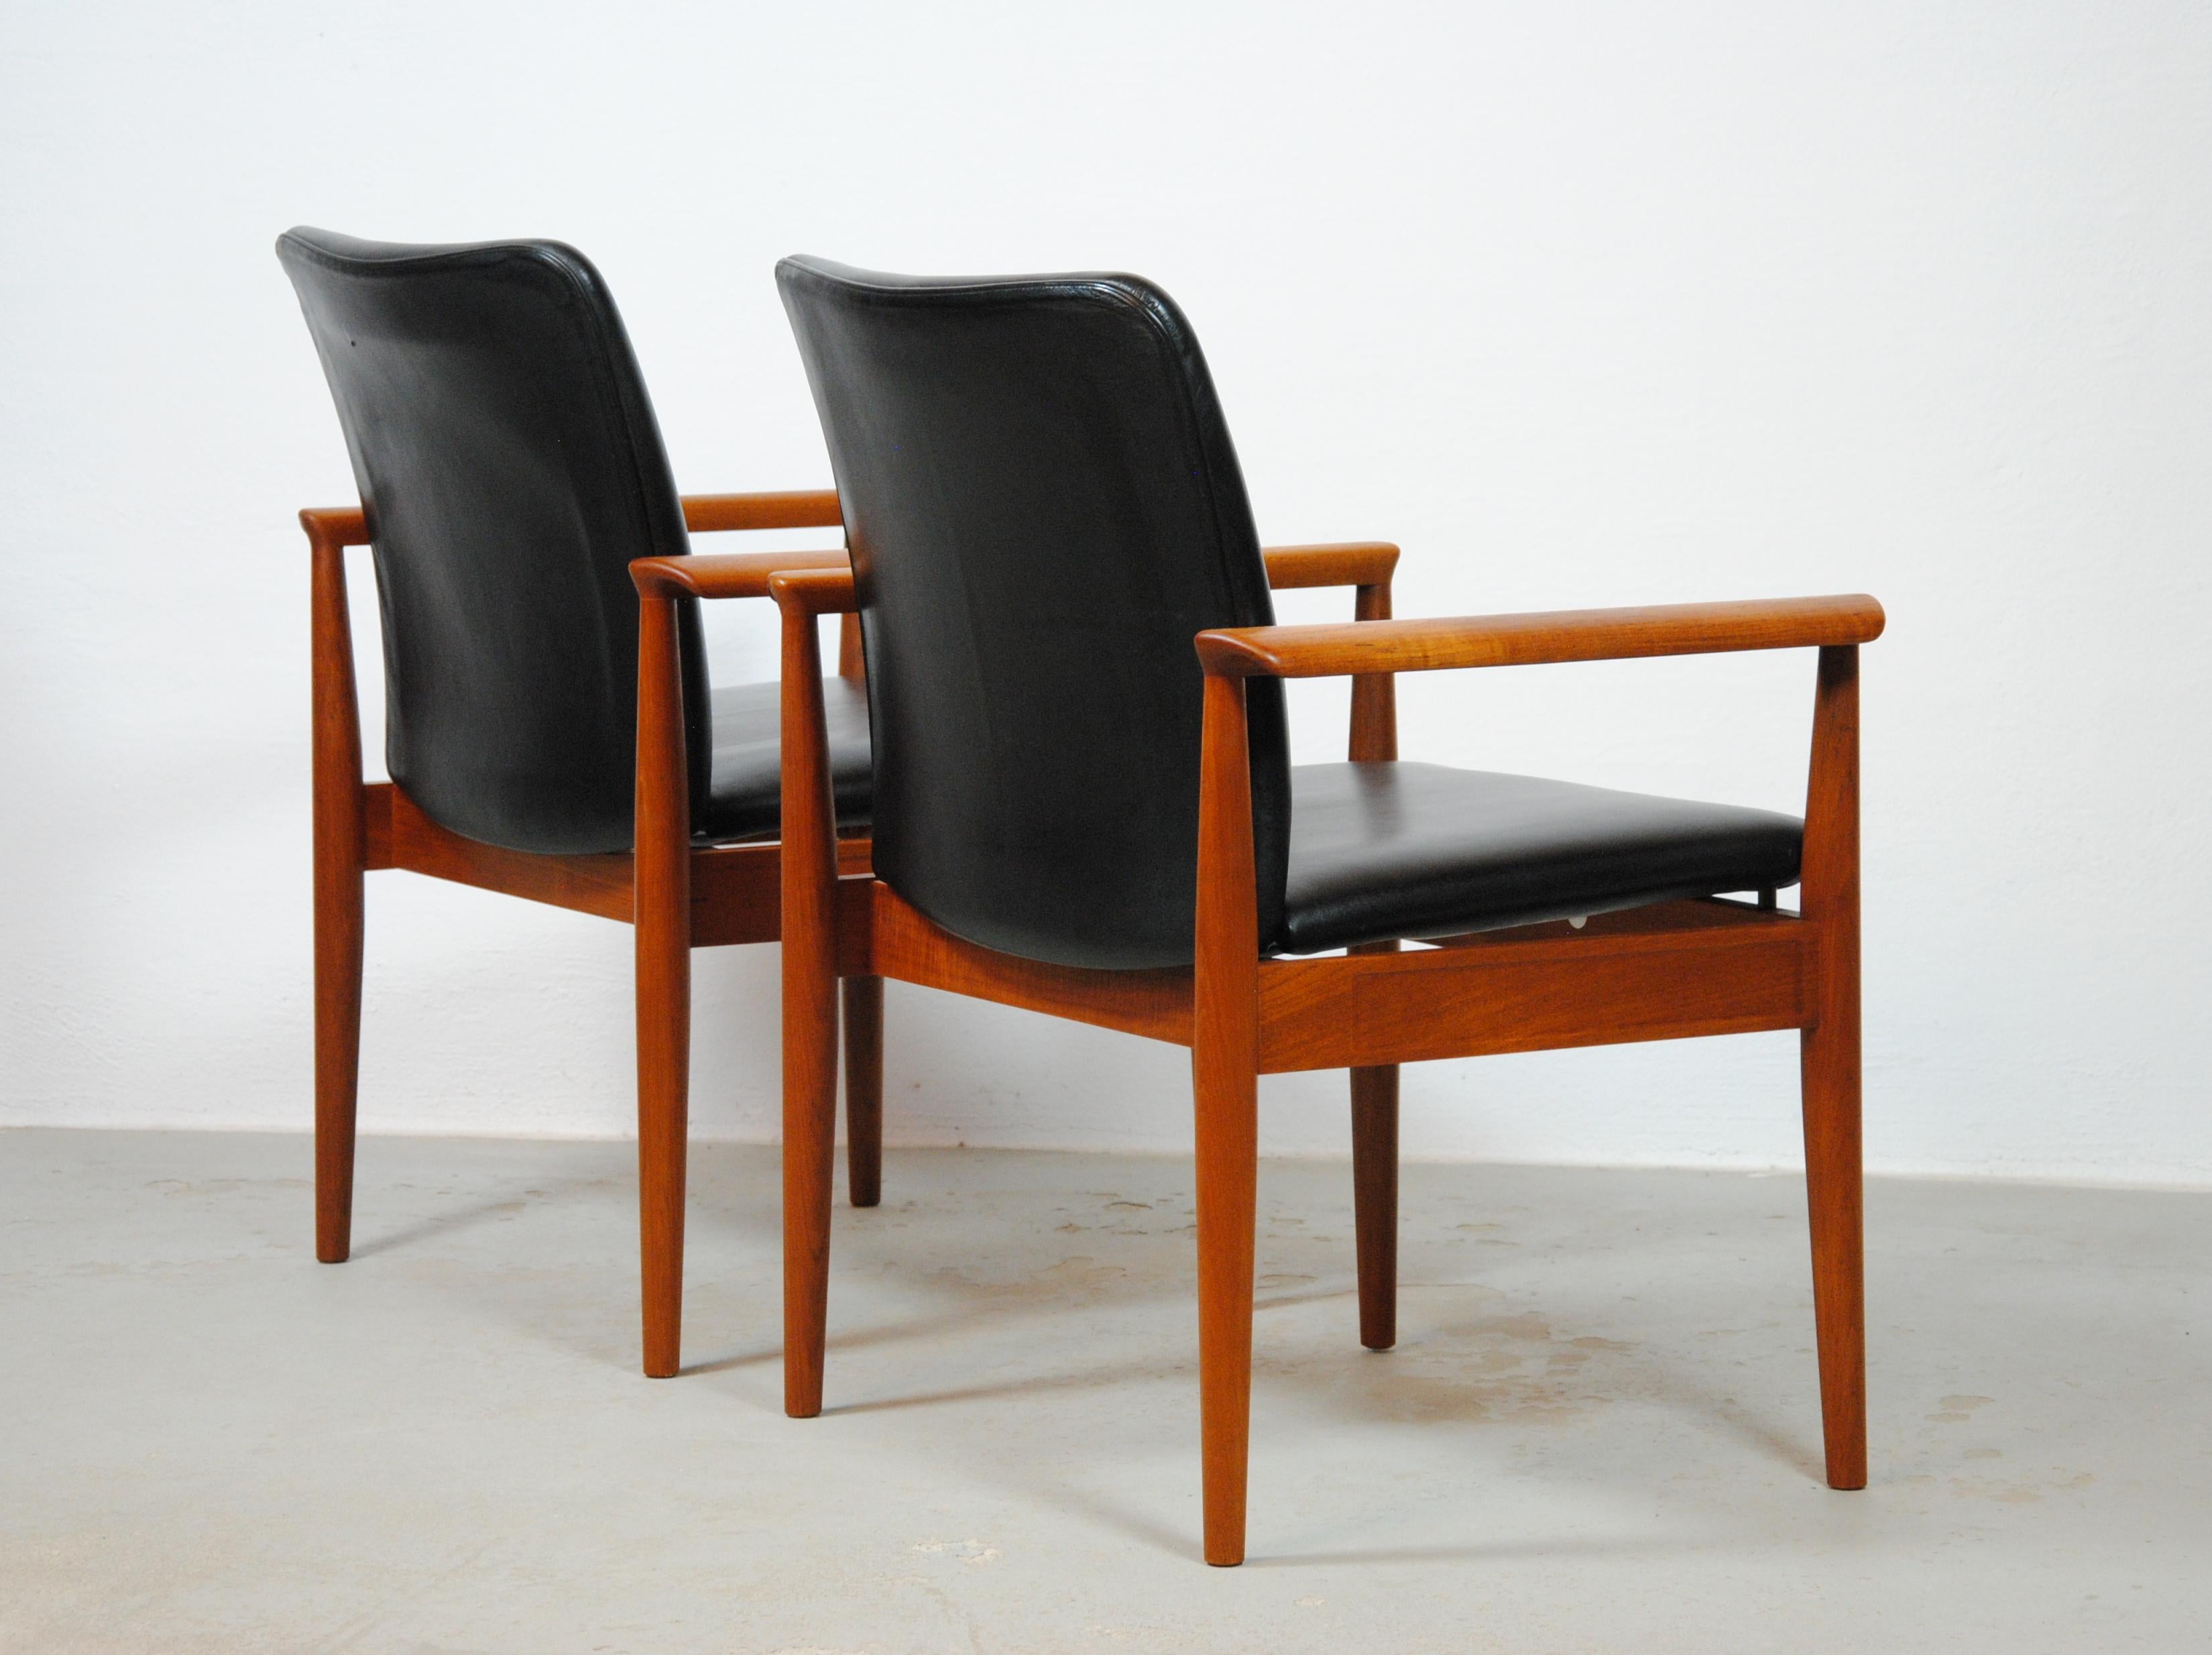 Danish 1960s Finn Juhl Set of Two Fully Restored Armchairs in Teak and Leather by Cado For Sale